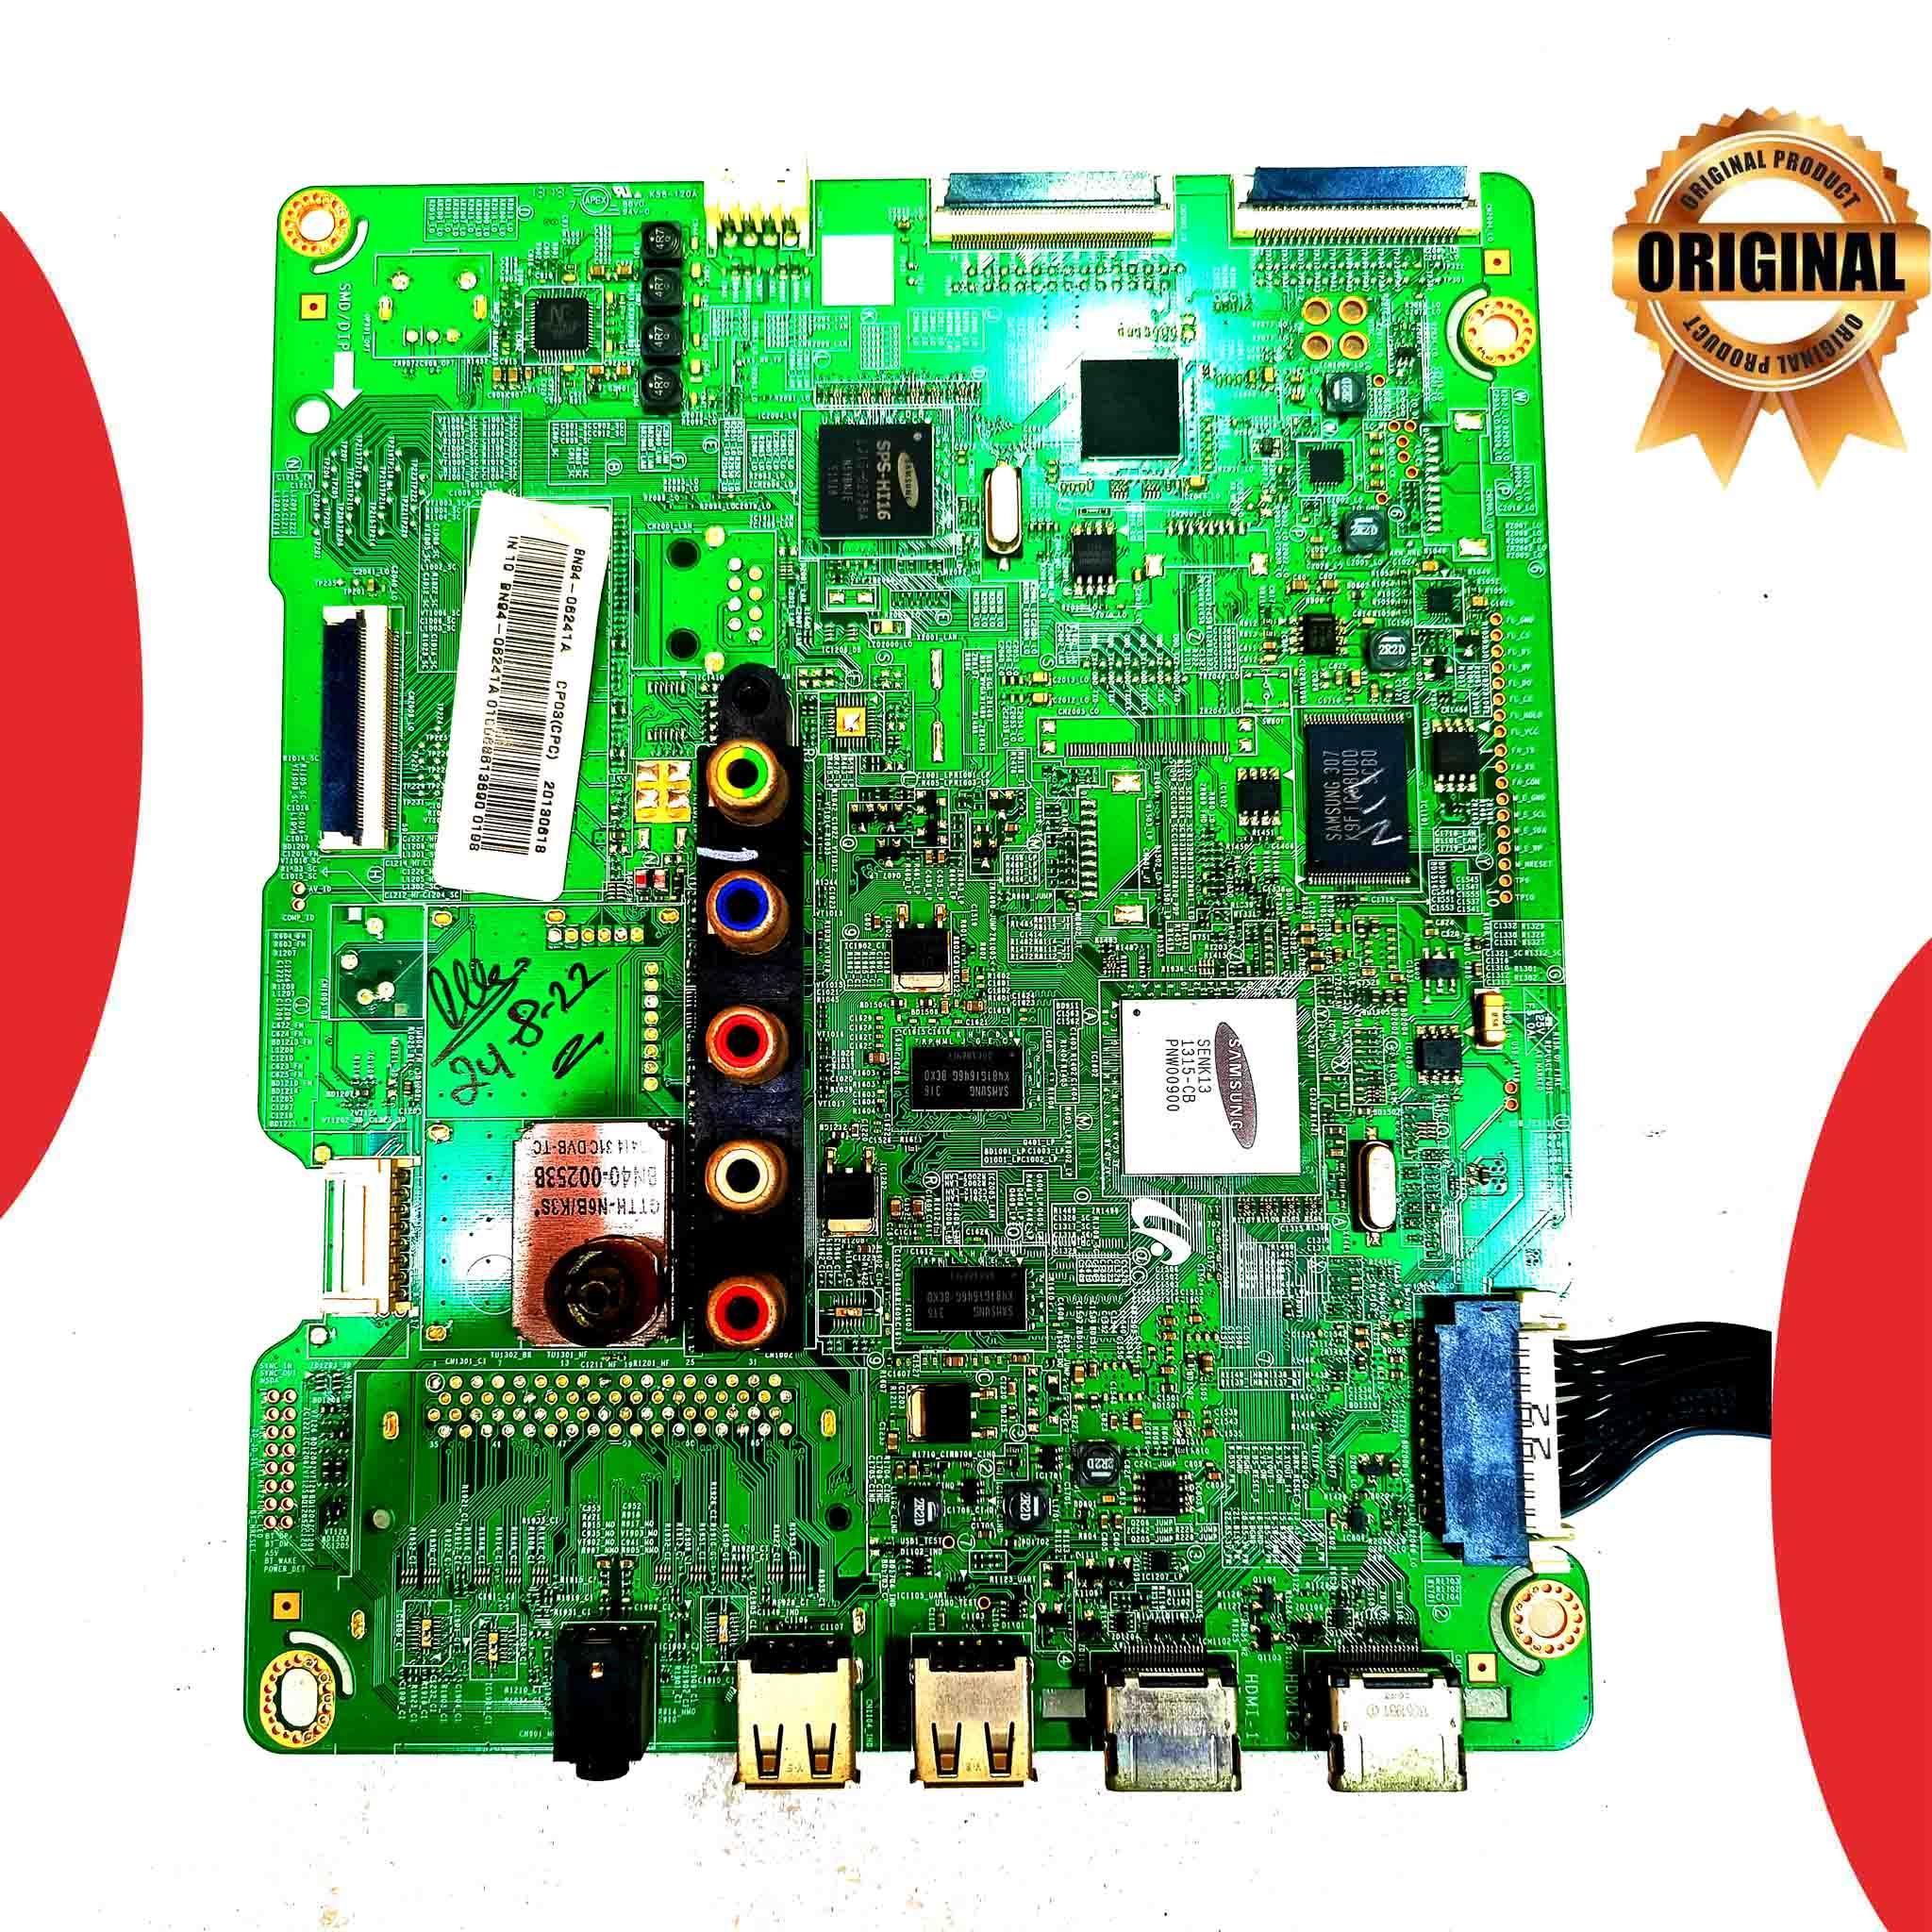 Samsung 43 inch Plasma TV Motherboard for Model PS43F4100AR - Great Bharat Electronics